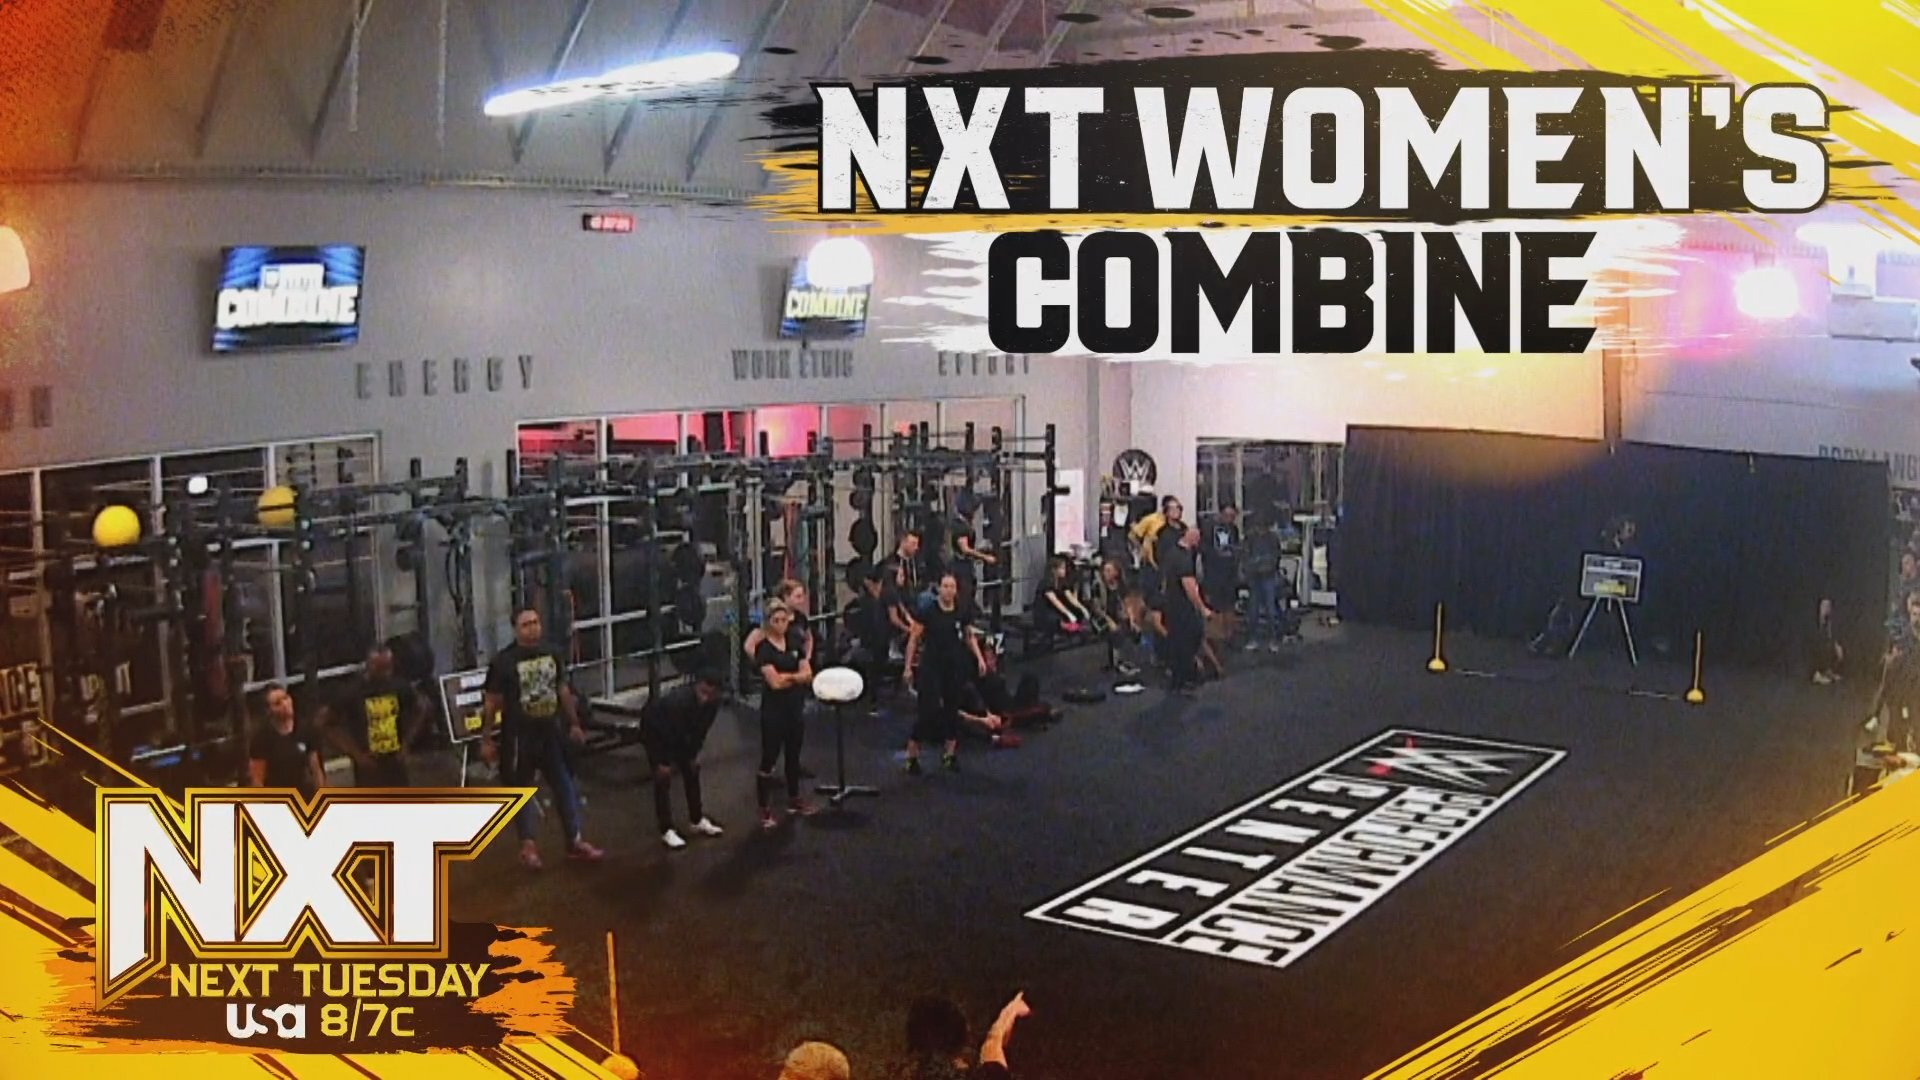 Who Will Survive The NXT Women’s Combine?